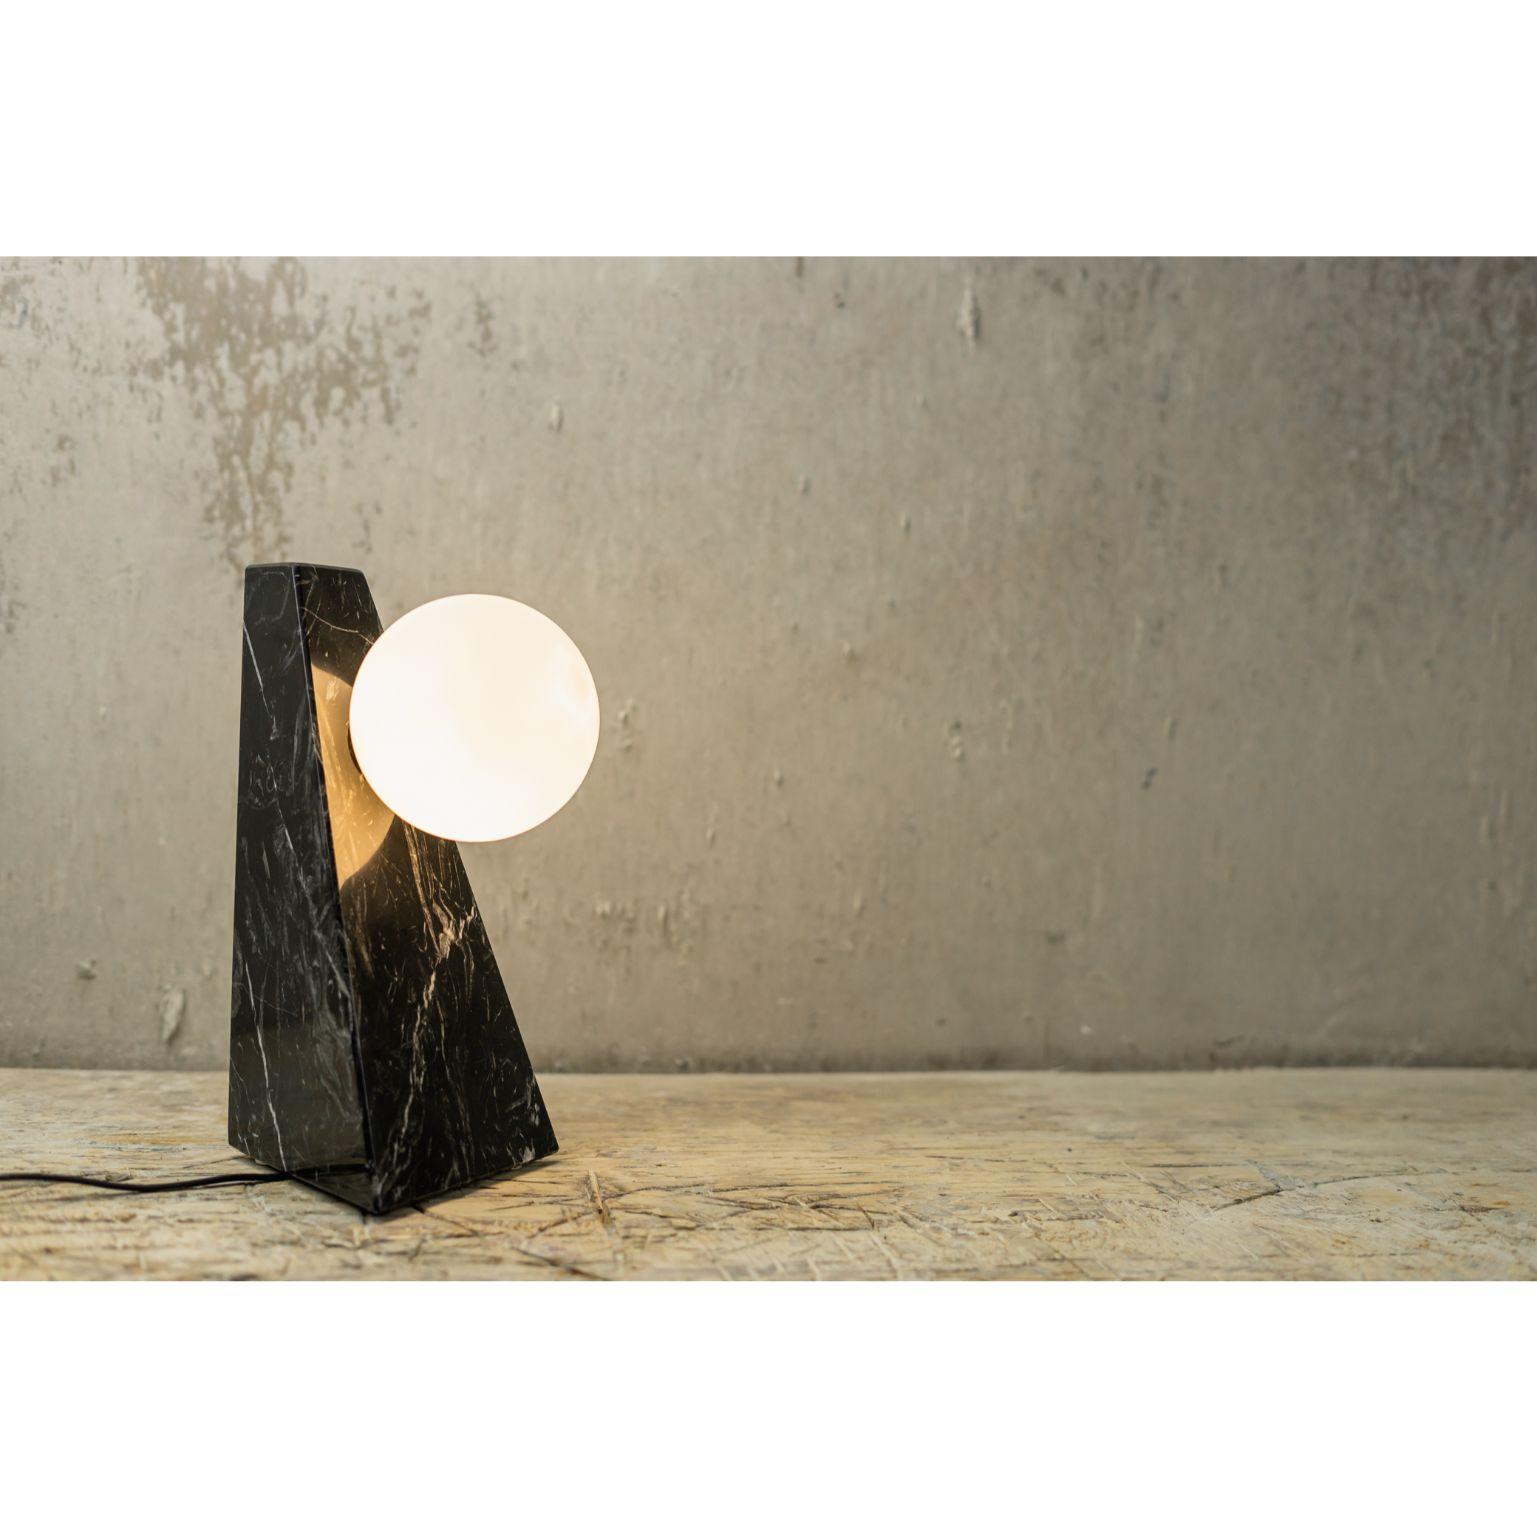 Point of Contact Marble Lamp by Essenzia
Materials: Nero Marquina
Dimensions: 30 x 18 x 20 cm

Also Available: Carrara, India Green

Table lamp that explores the concept of gravity suspension and interaction between two different cosmic shapes.

All